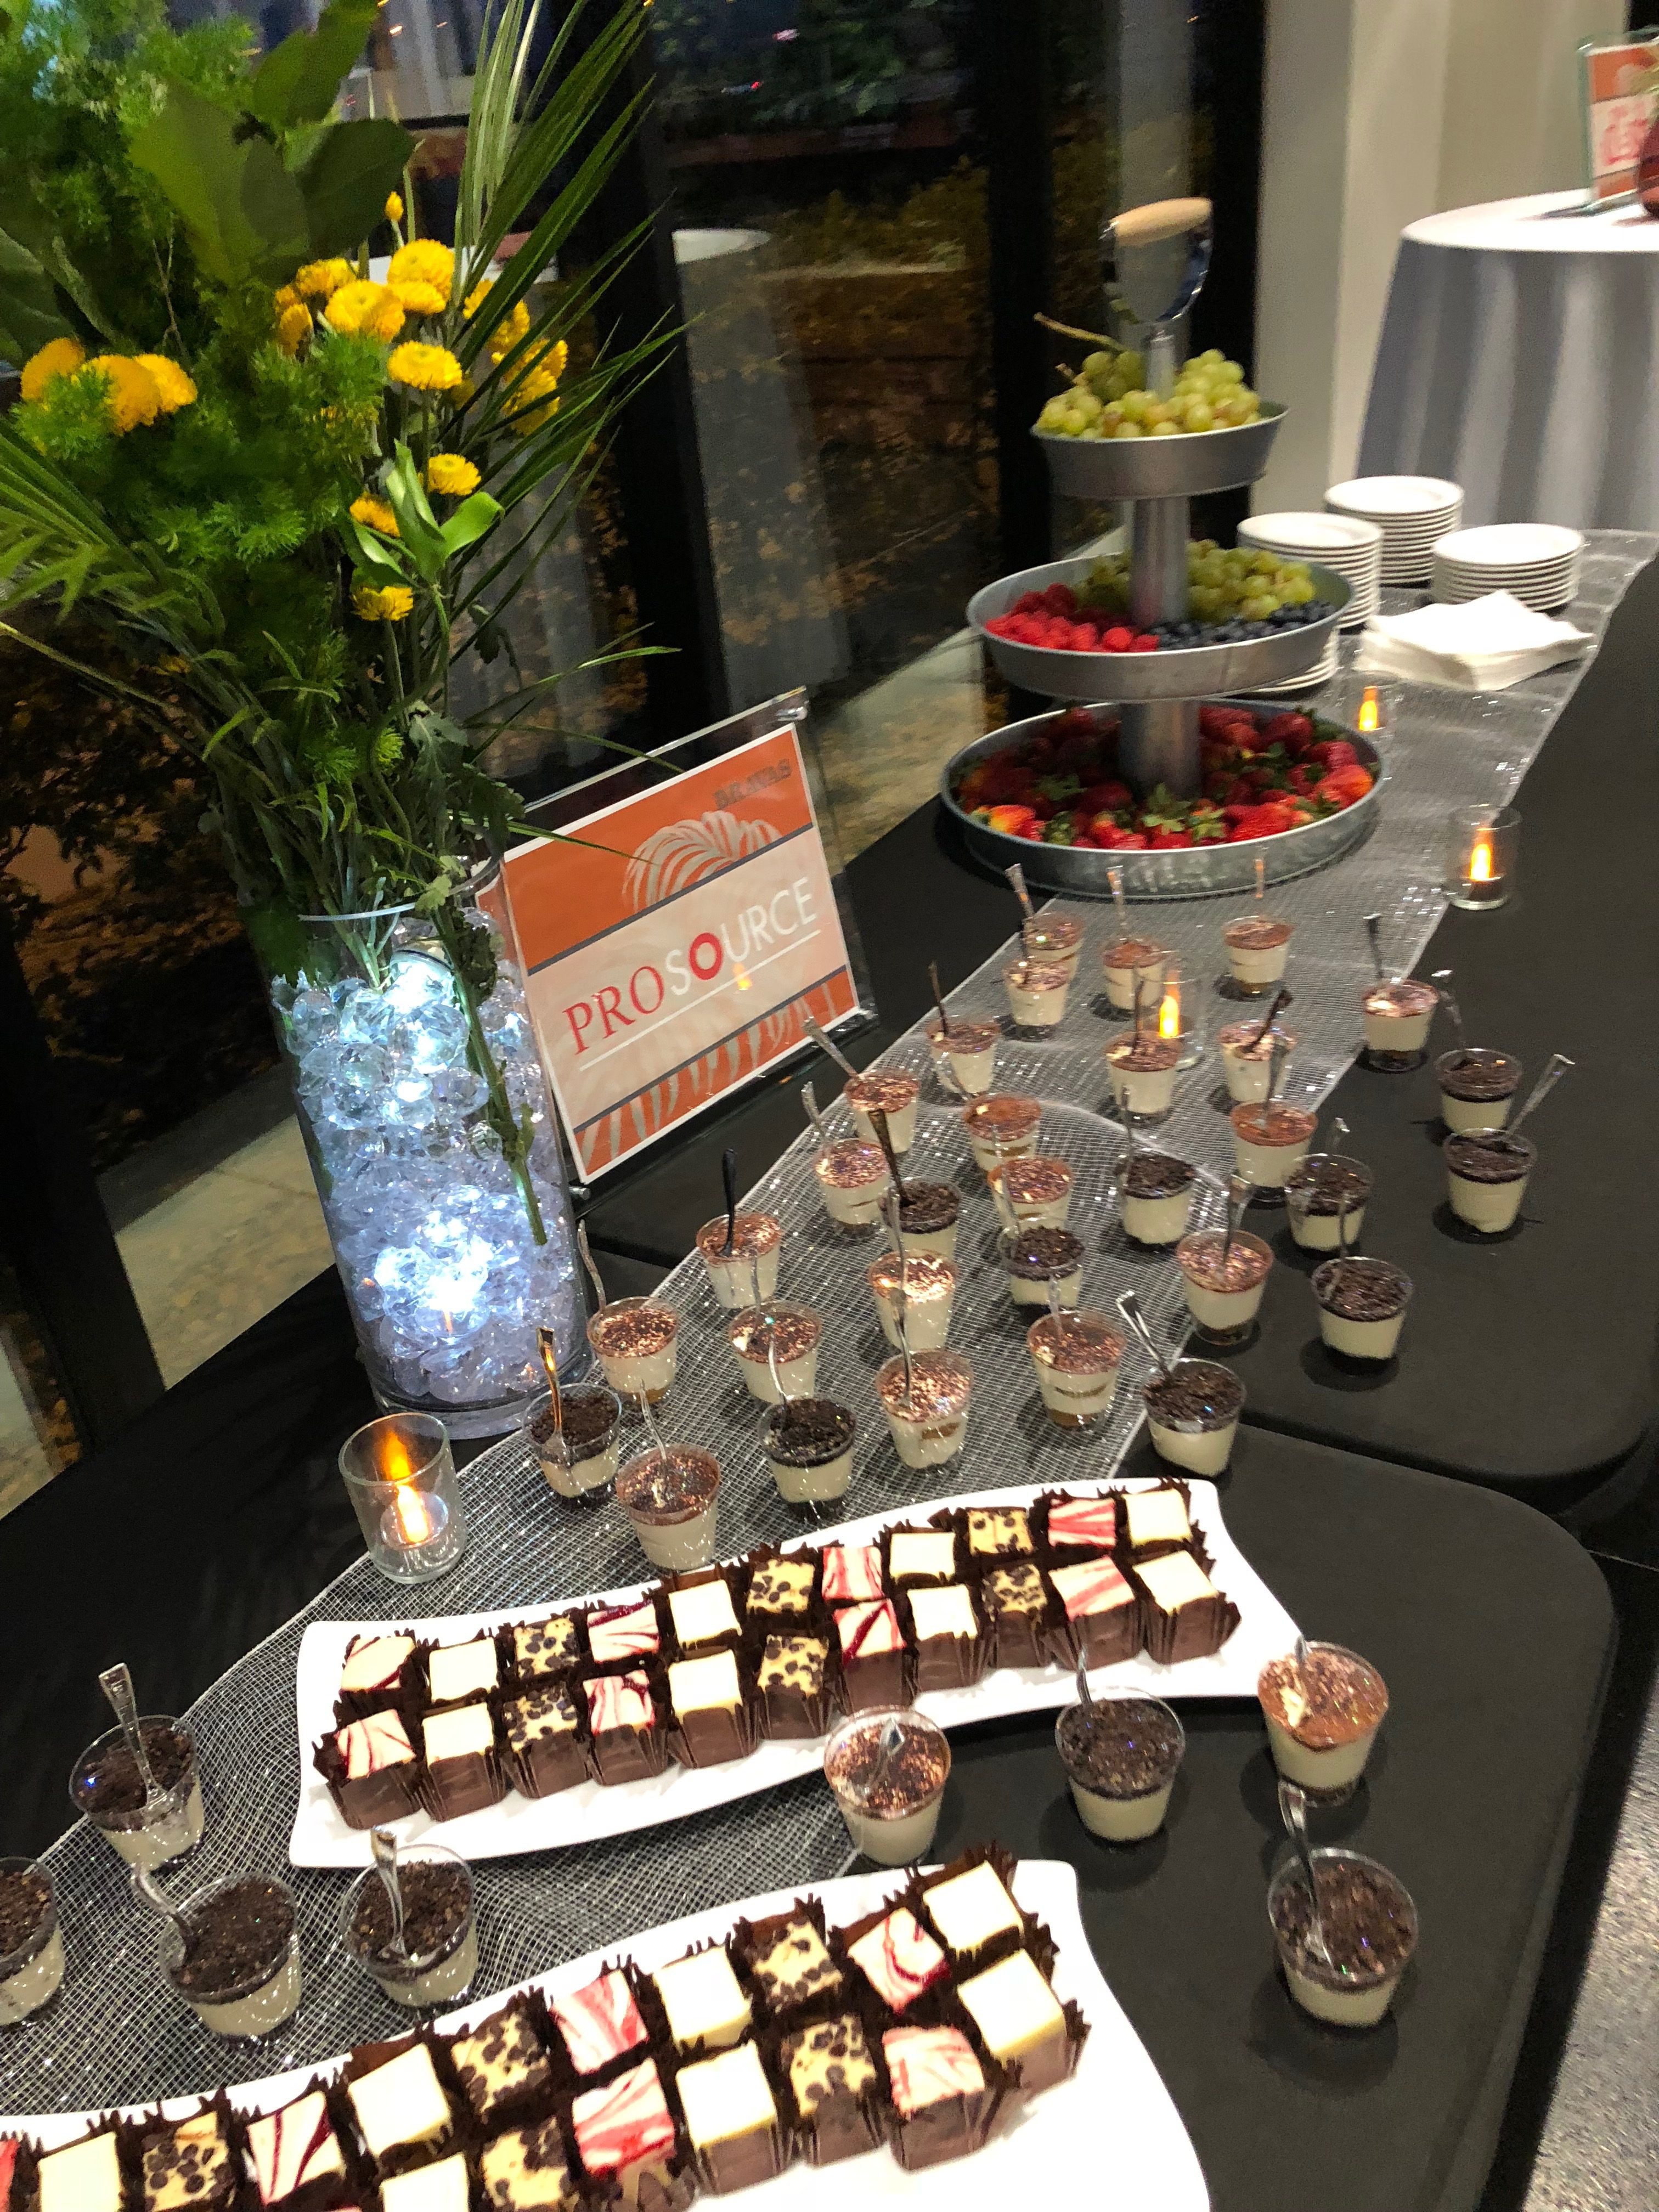 Desserts - Catered by Kiss The Cook Las Vegas Catering